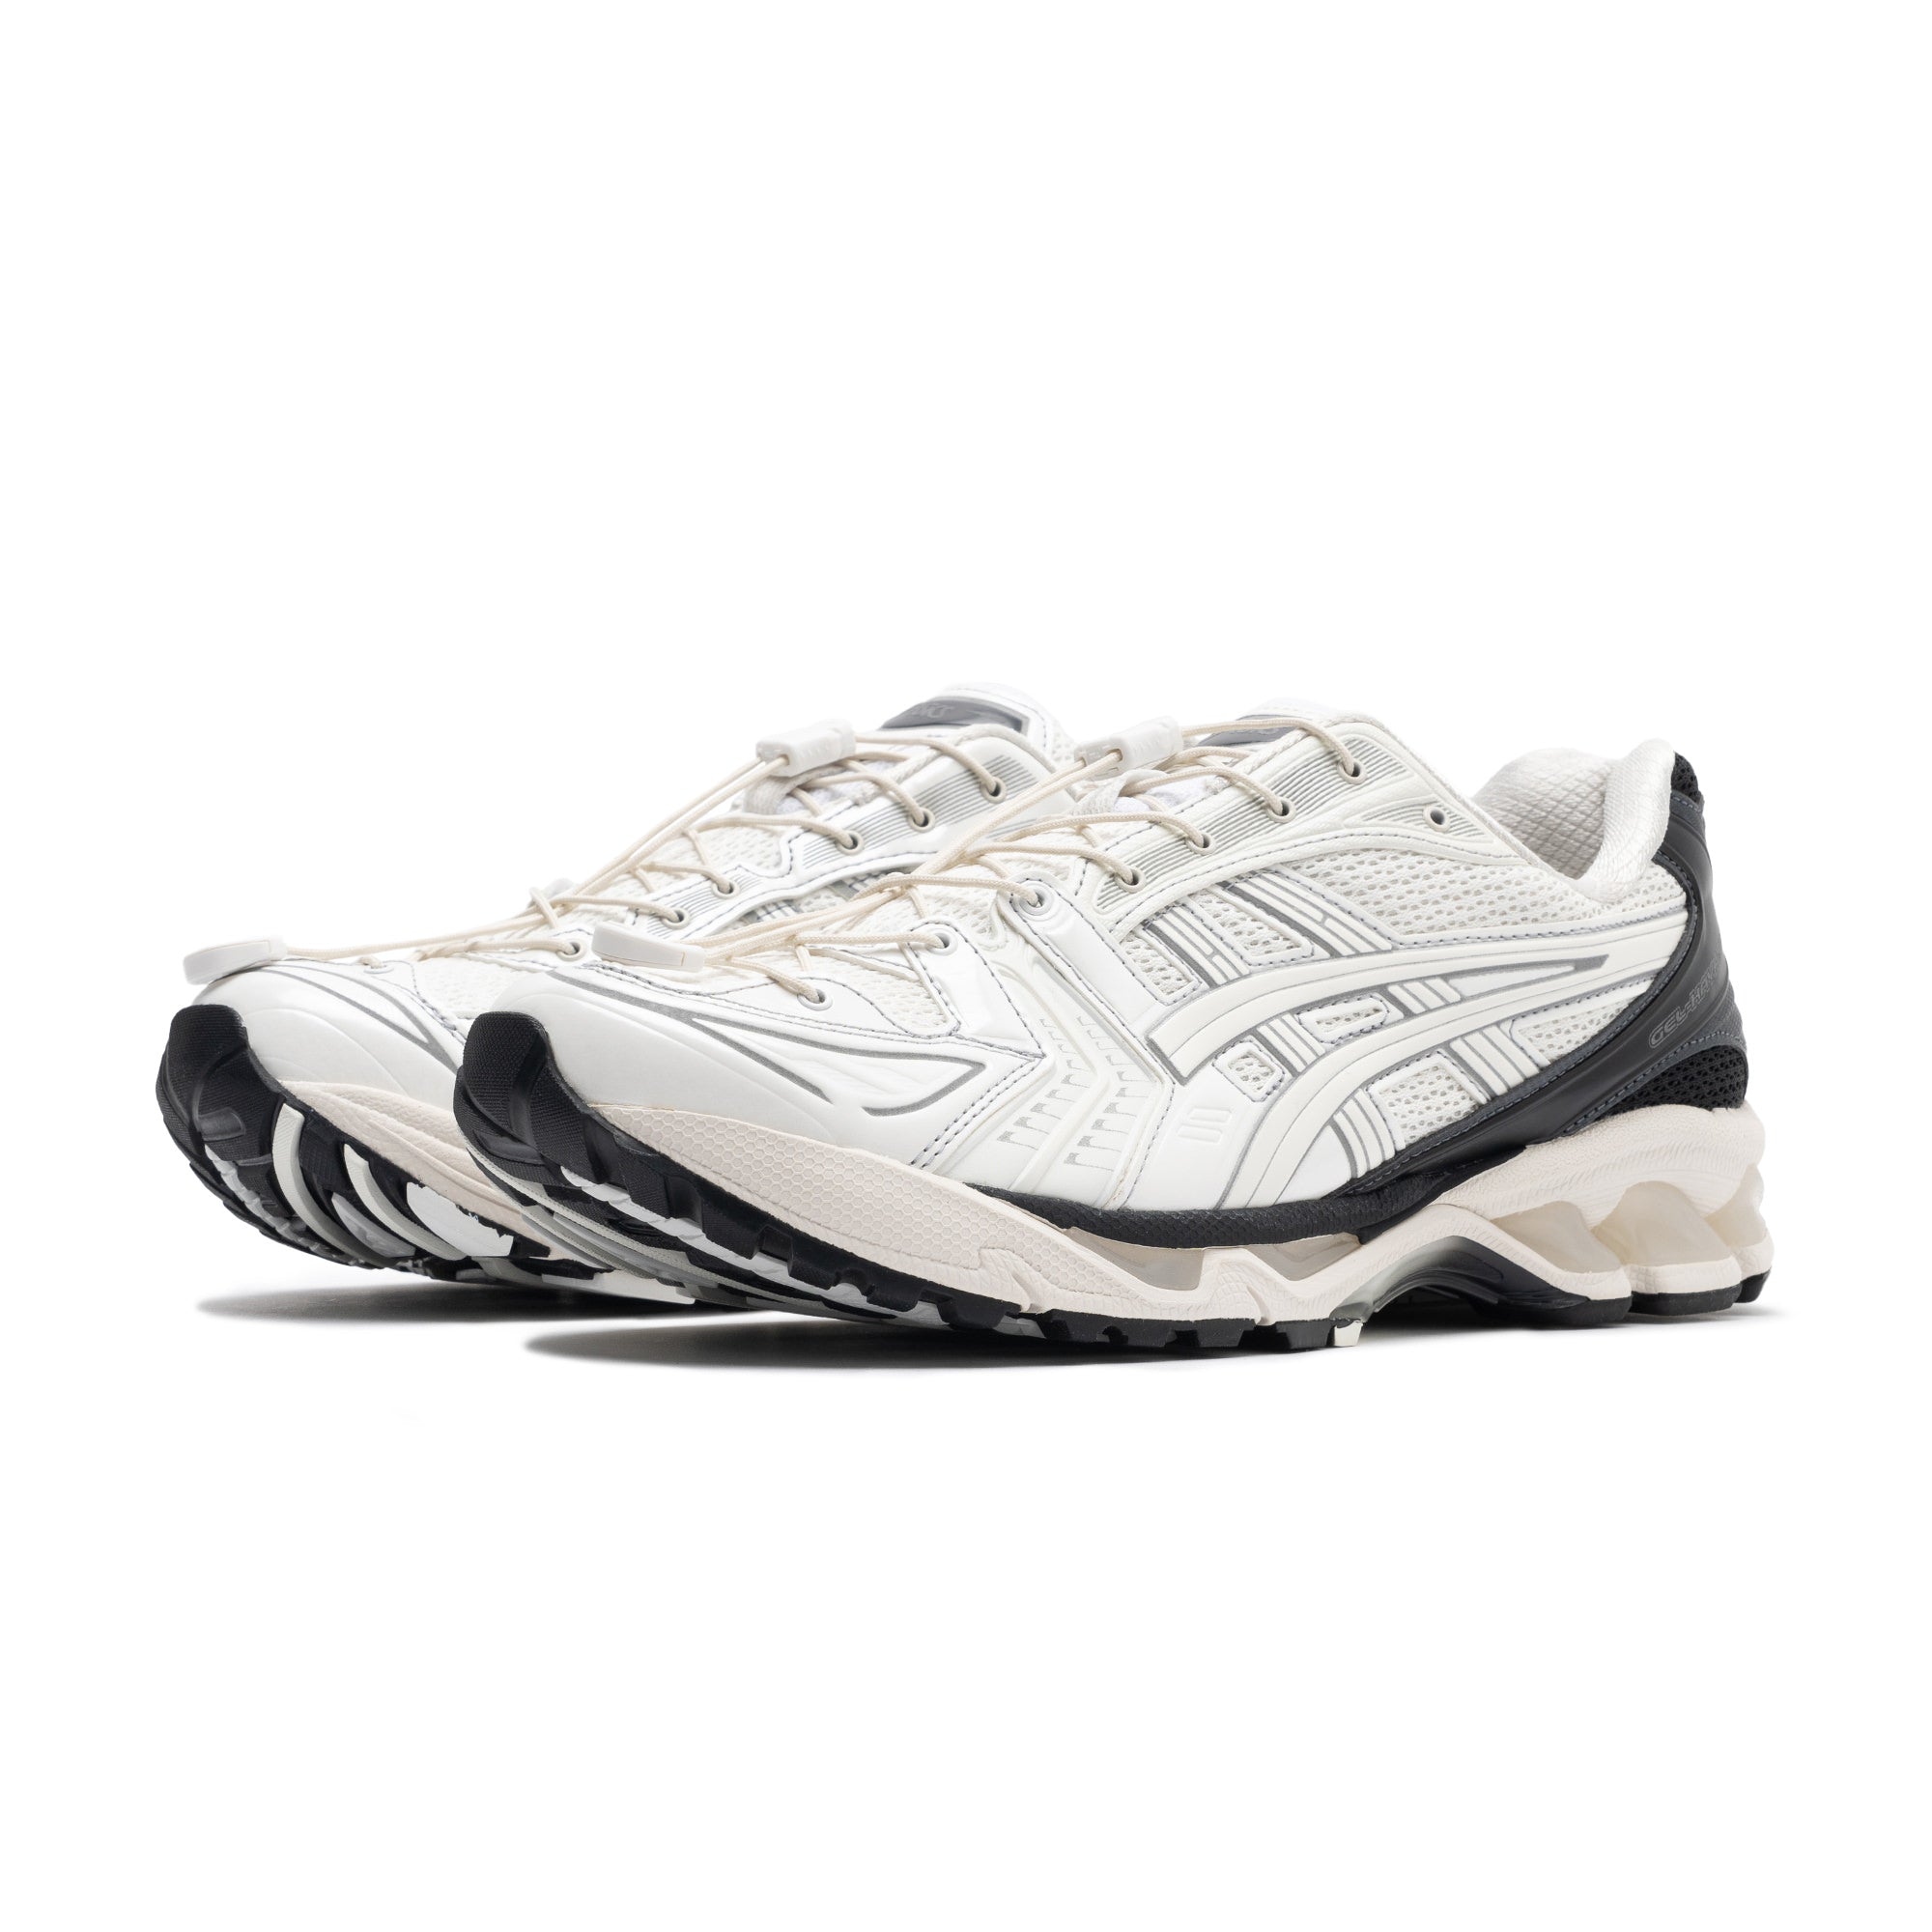 Unaffected Gel-Kayano 14 White 1201A922-100